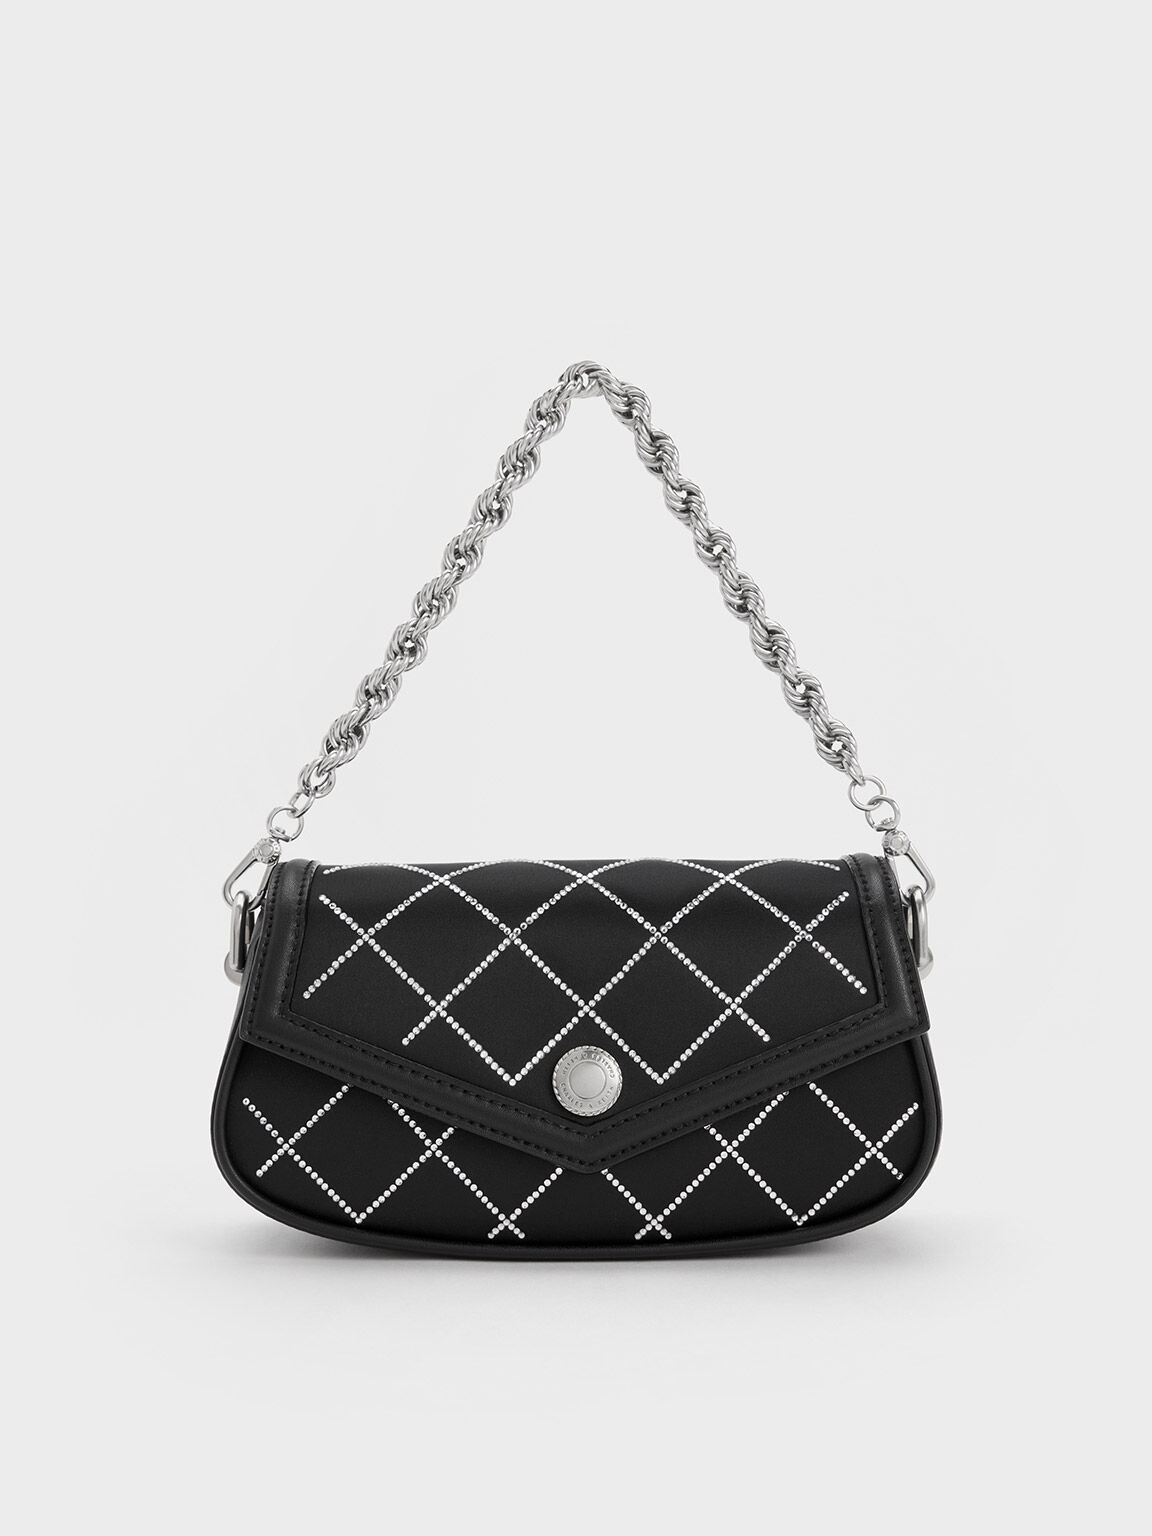 Women's Argyle Quilted Shoulder Bag, Chain Strap Large Capacity